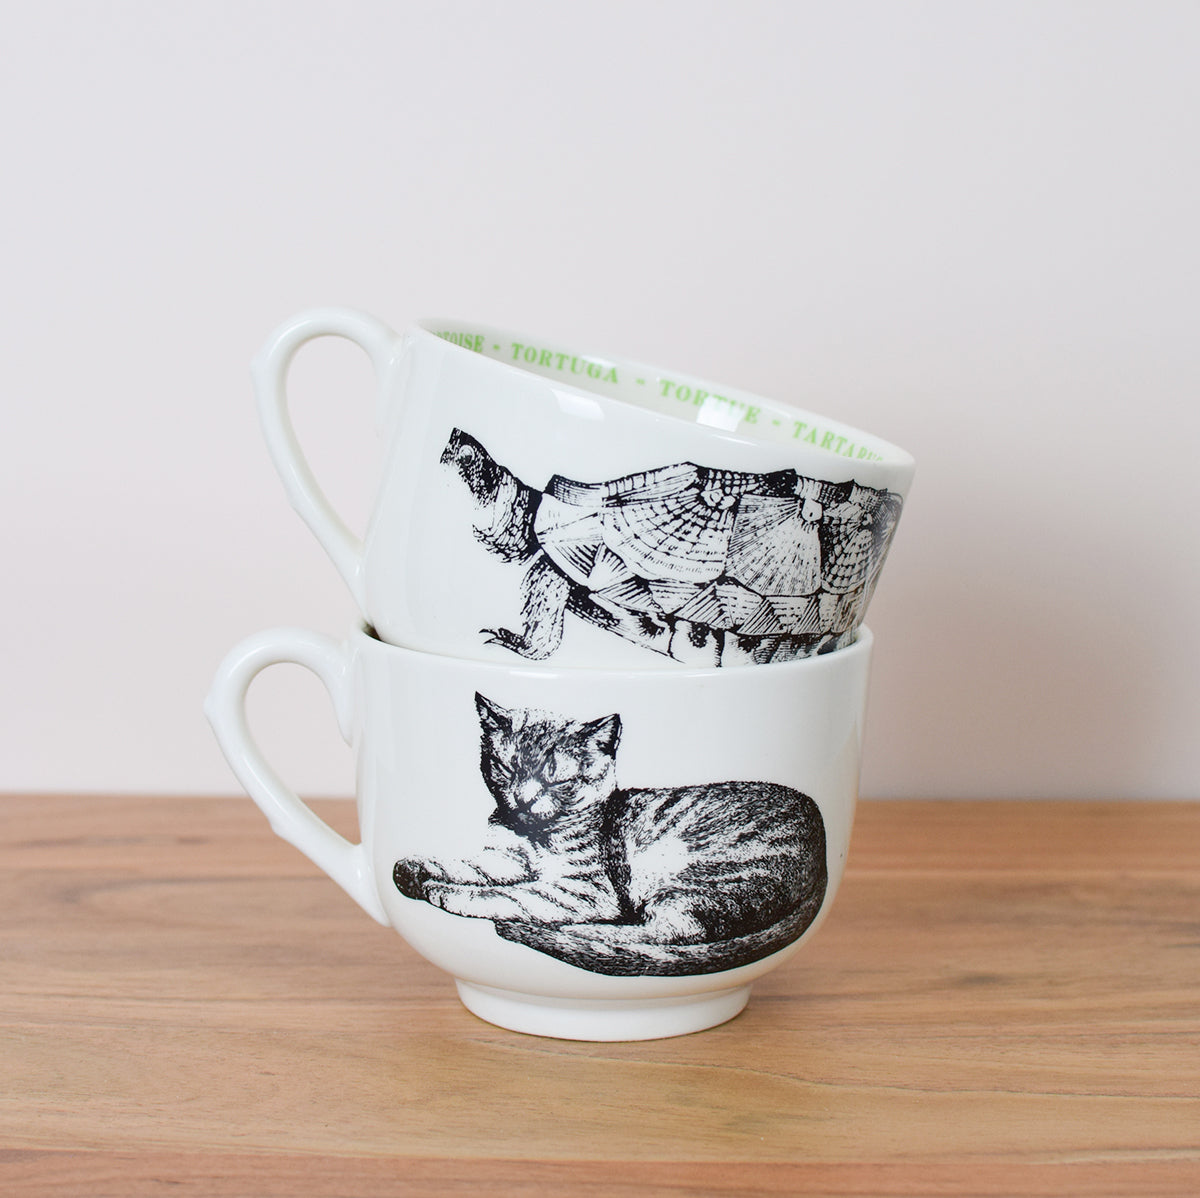 oversized cups with vintage illustrations